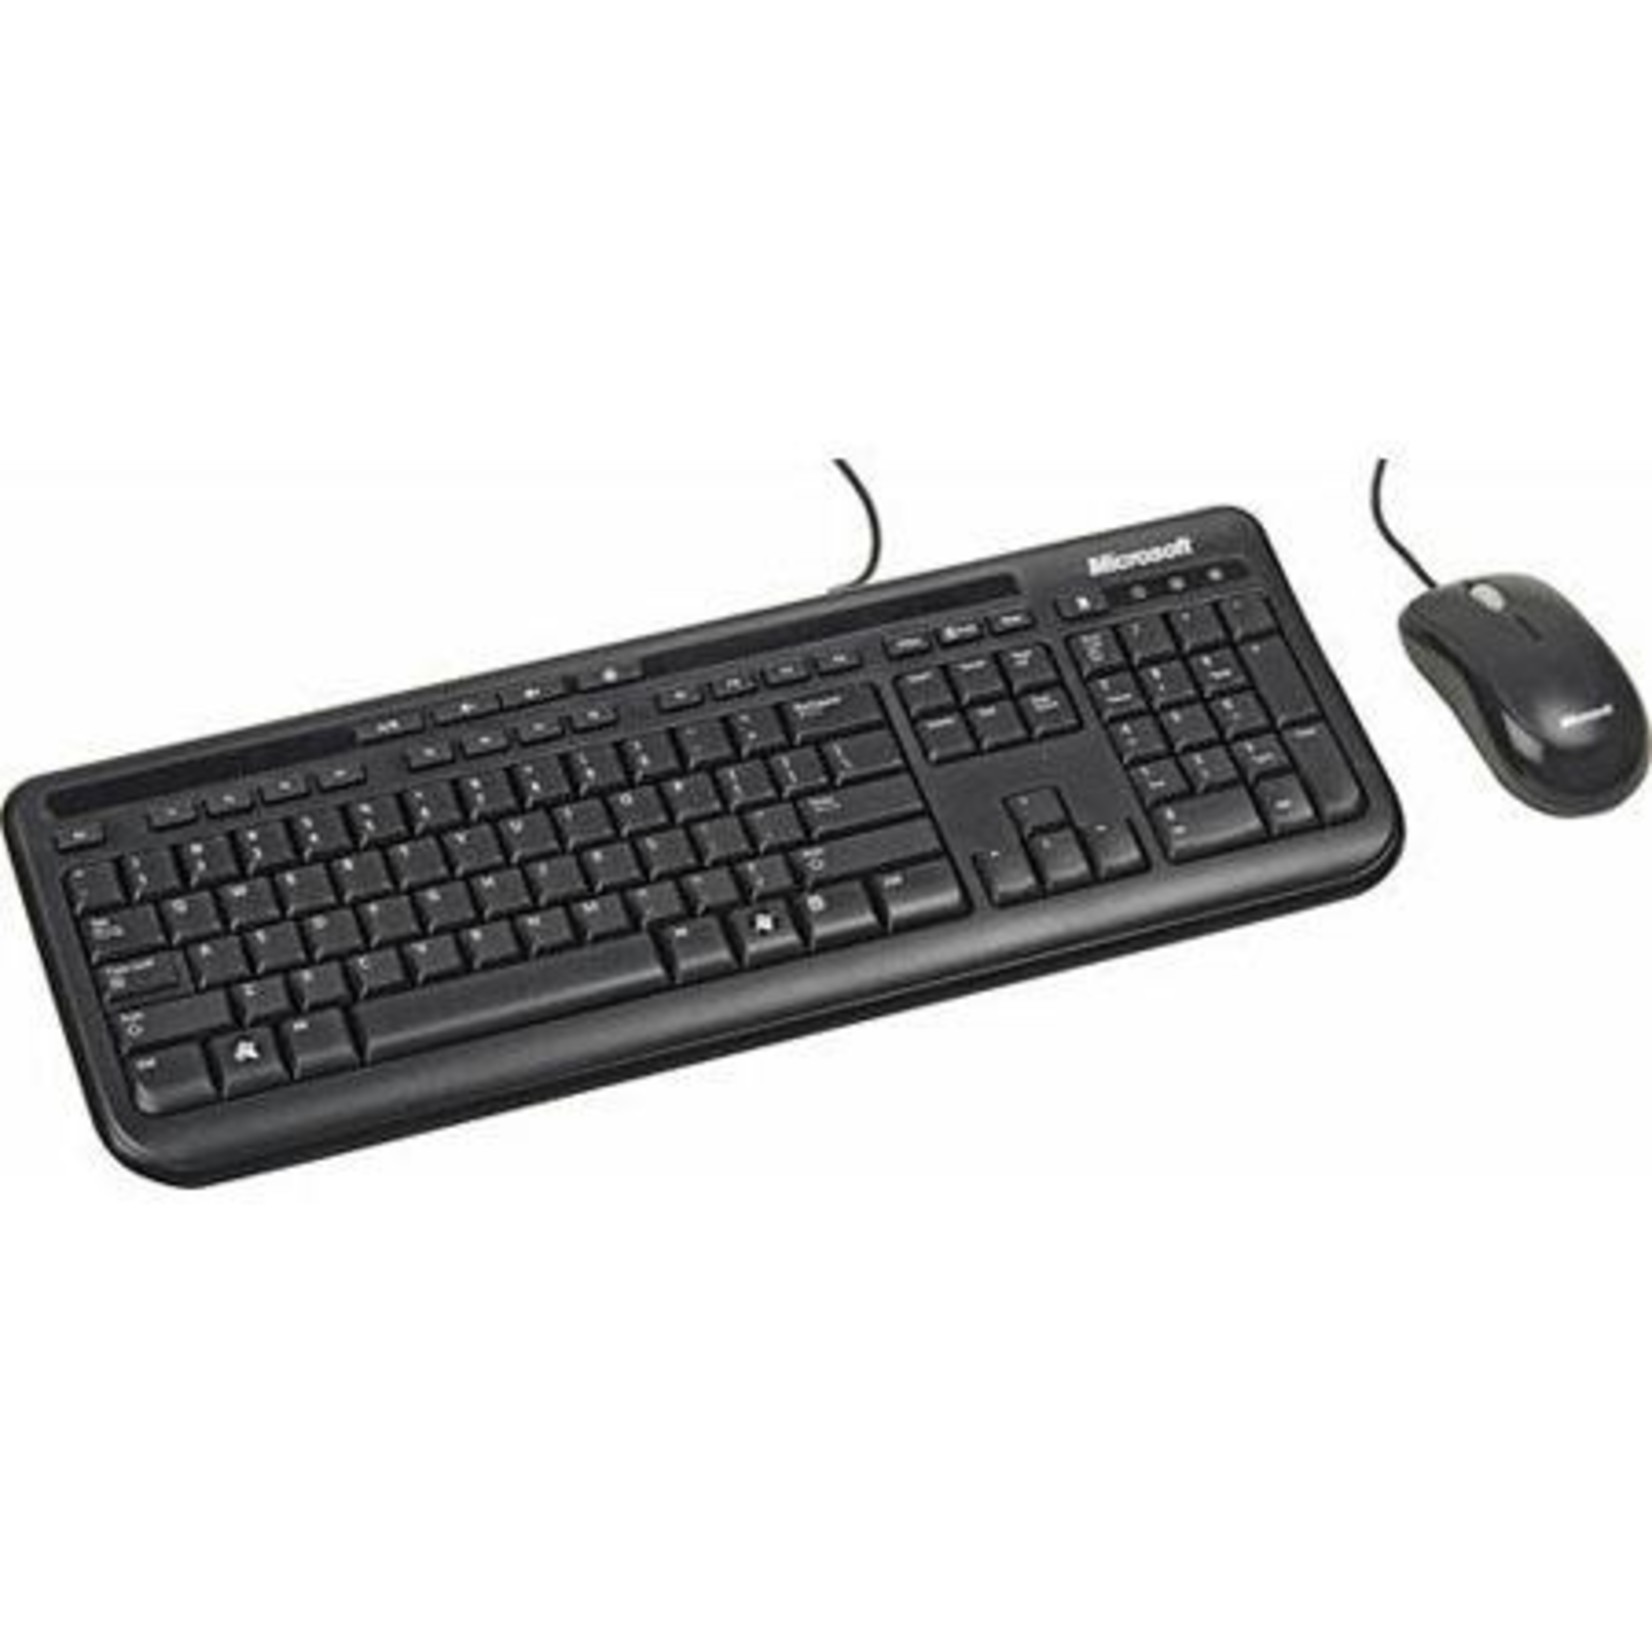 Microsoft Microsoft Wired Desktop 600 Keyboard and Mouse Combo